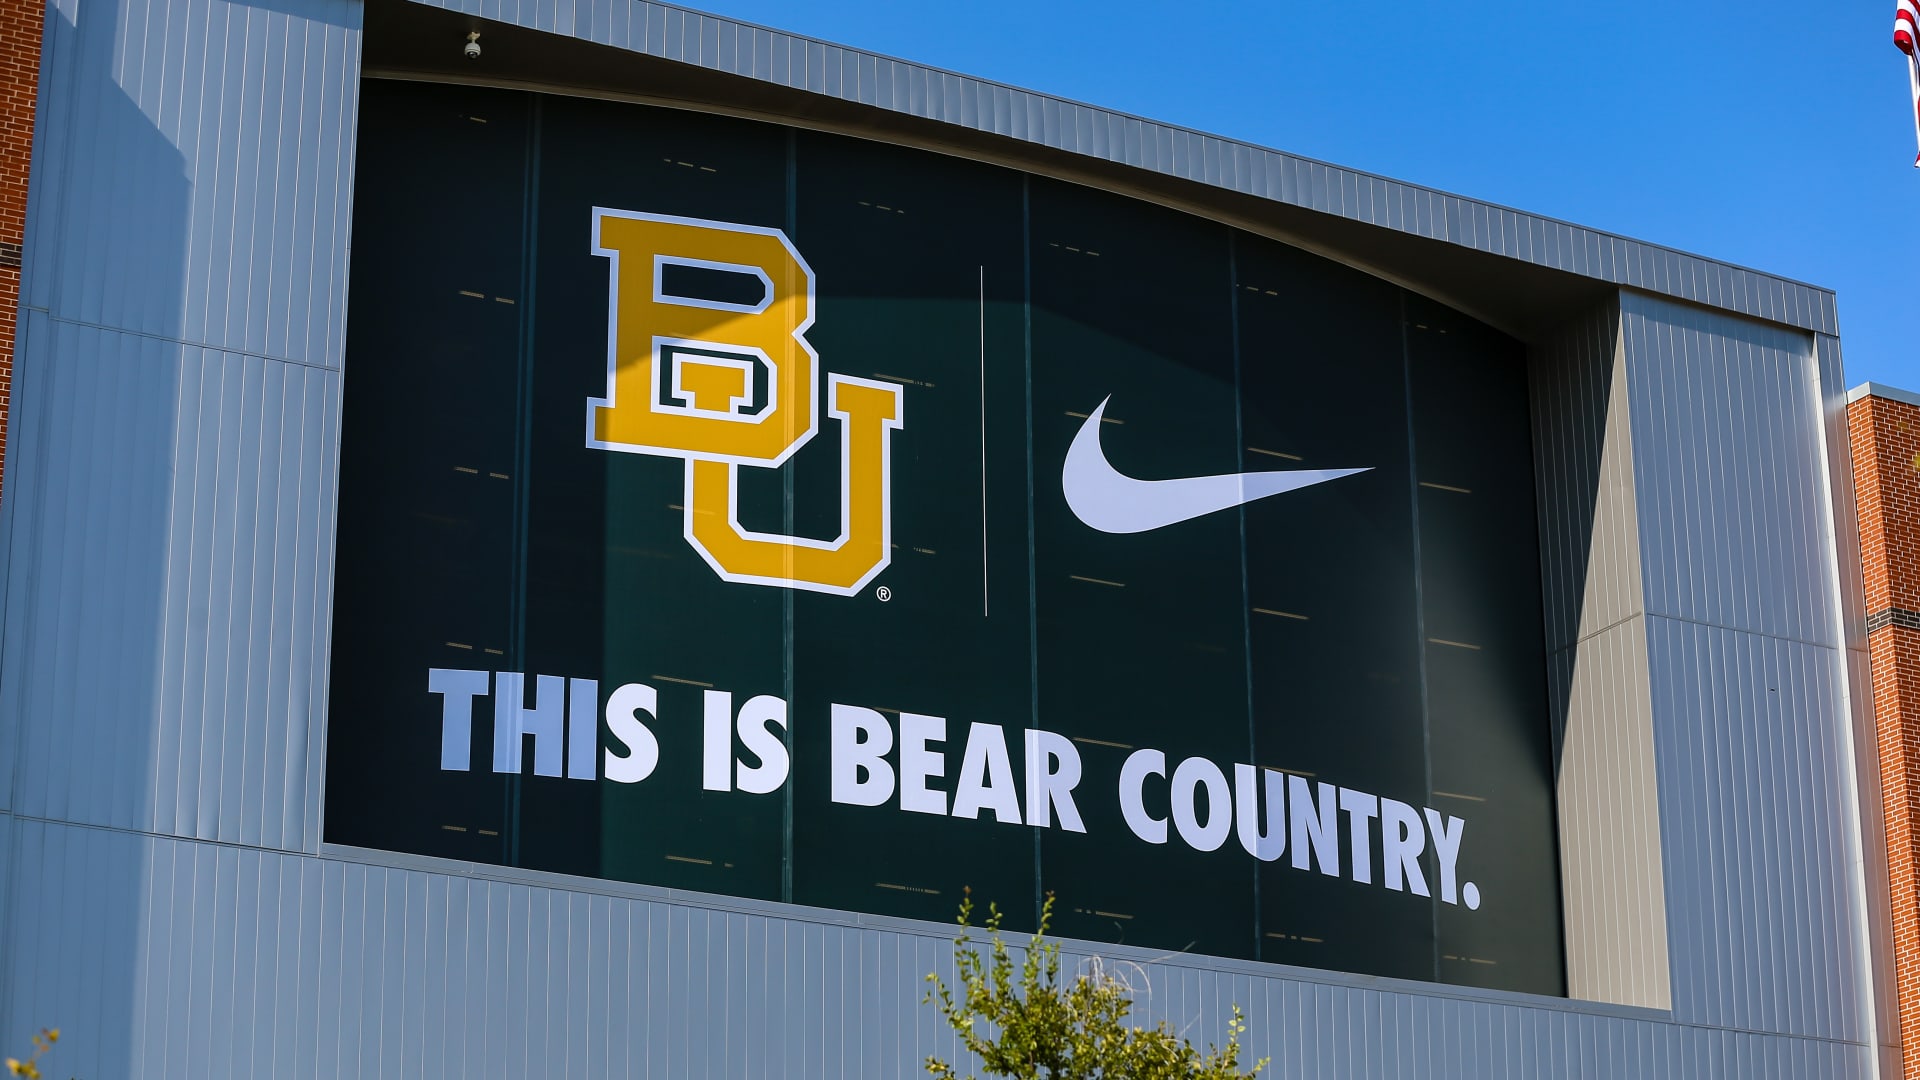 Baylor surpasses Ivy League in university giving performance ranking